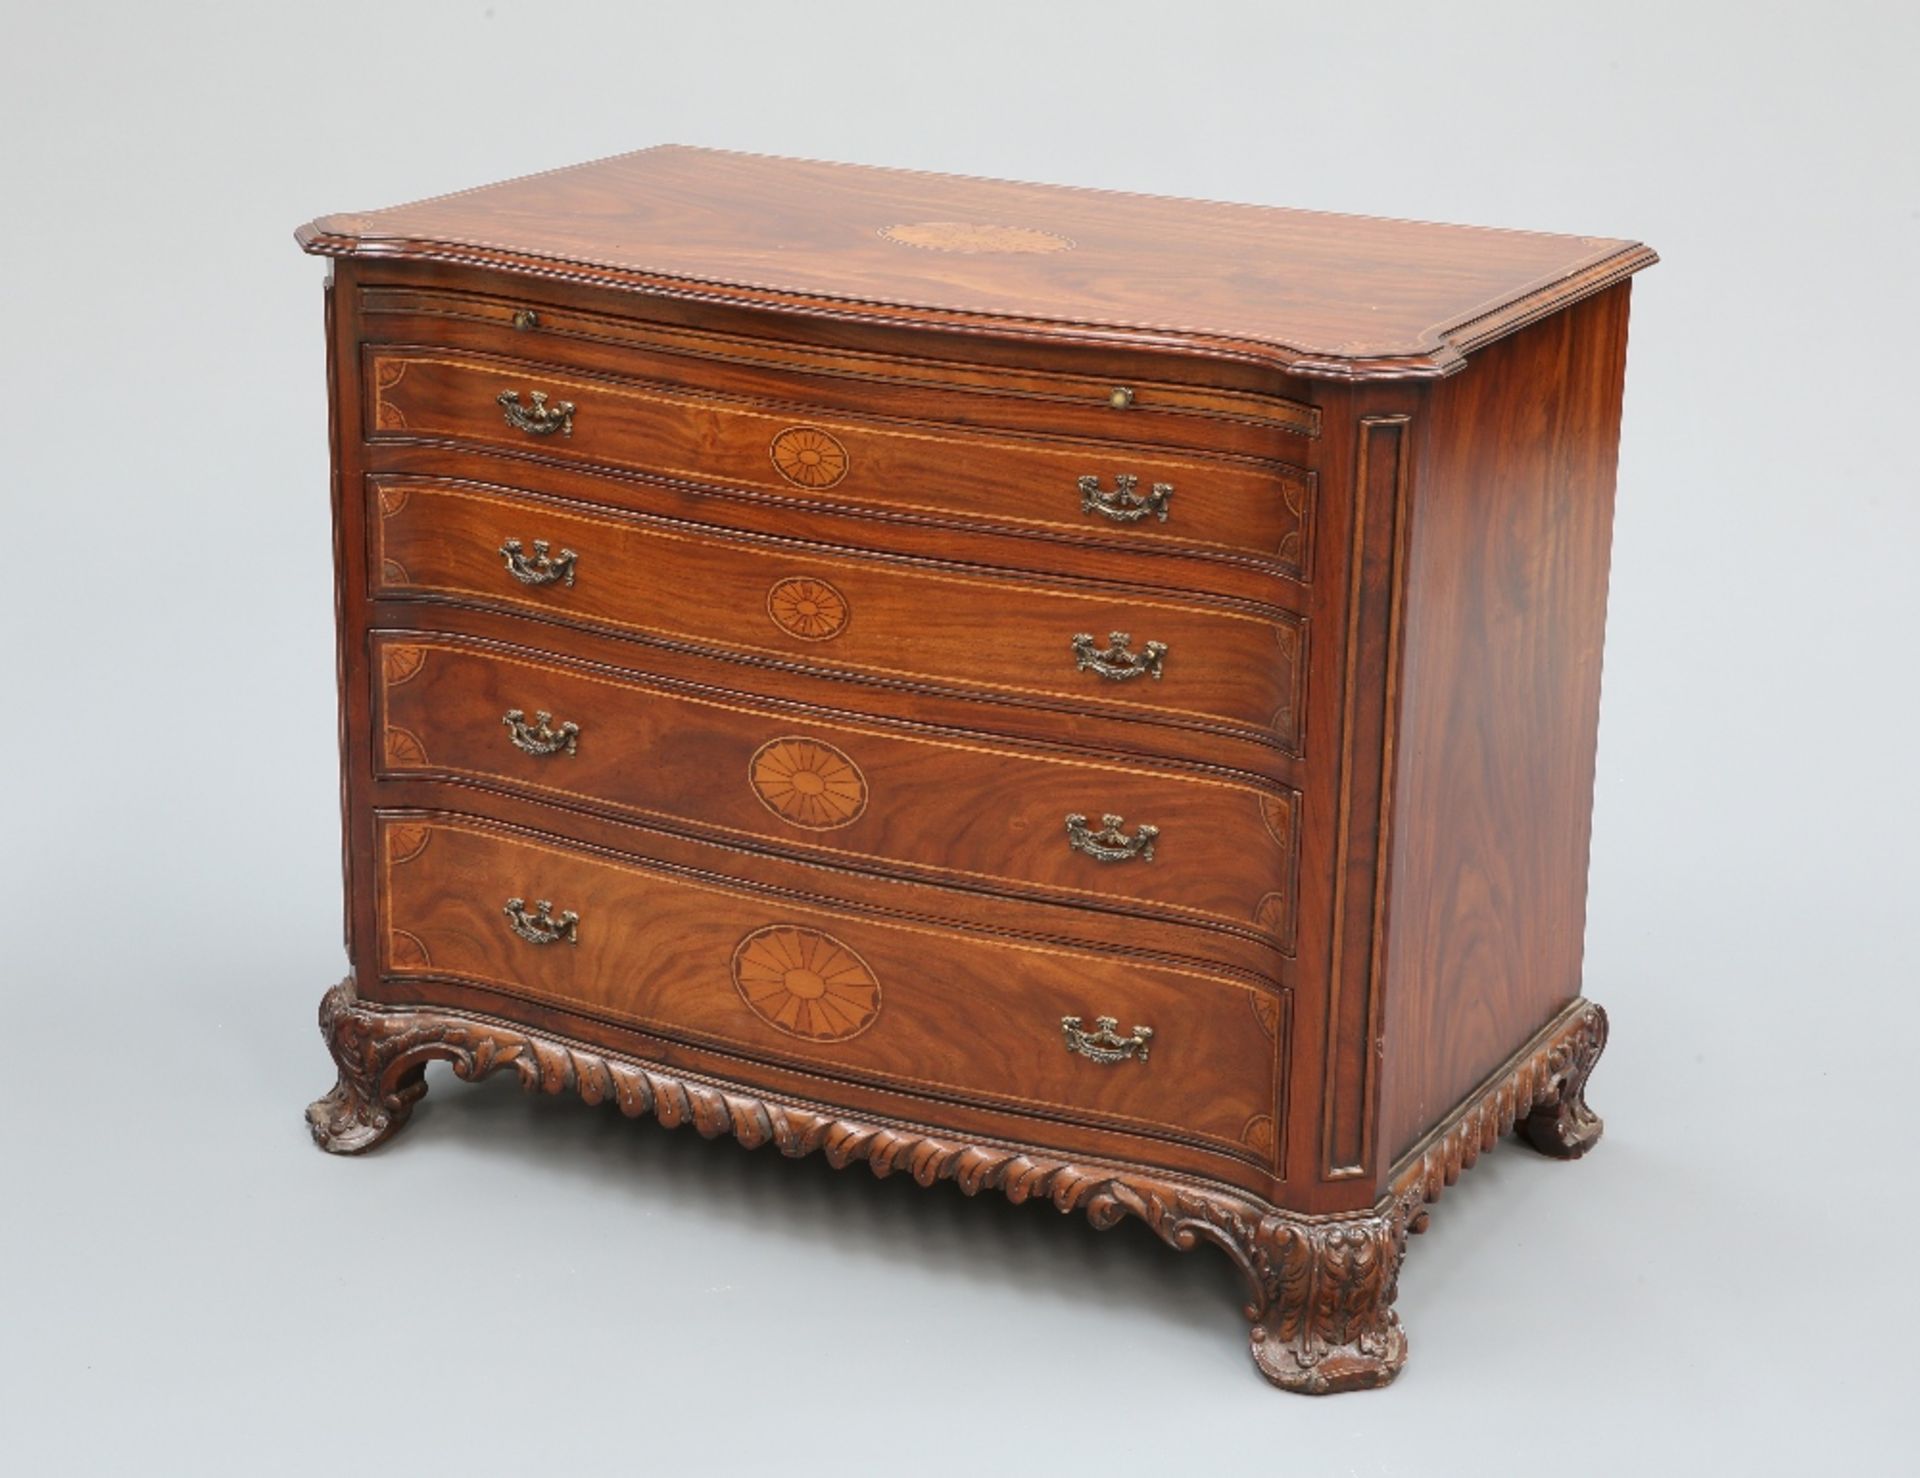 A HANDSOME GEORGE III STYLE TEAK SERPENTINE DRESSING COMMODE